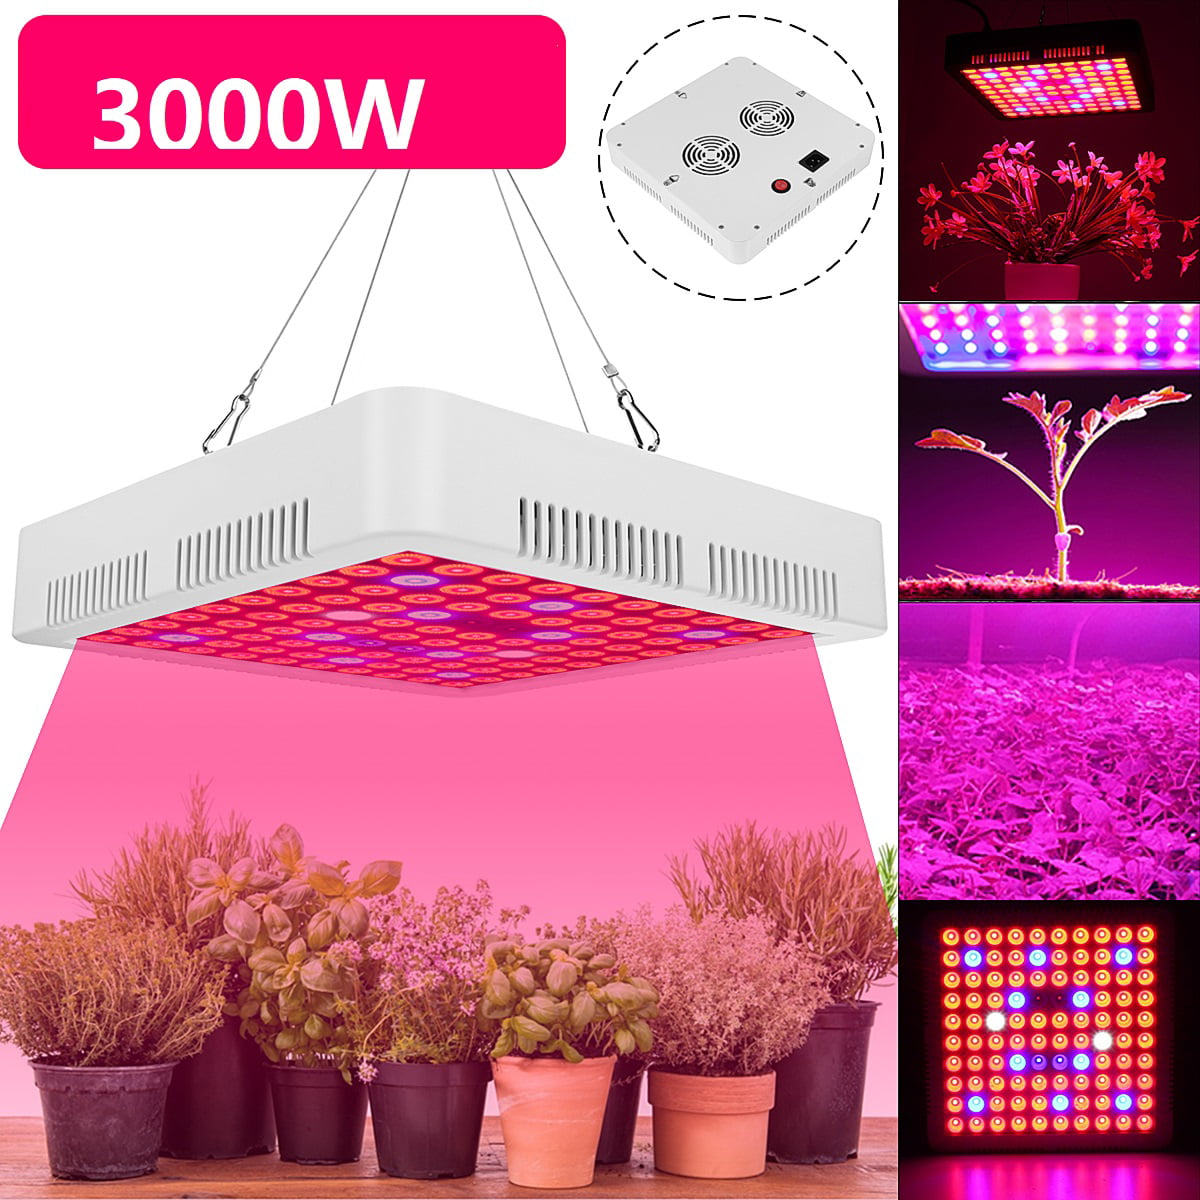 100W LED Grow Light Plant Growing Lamp Lights for Indoor Plants Hydroponics US 